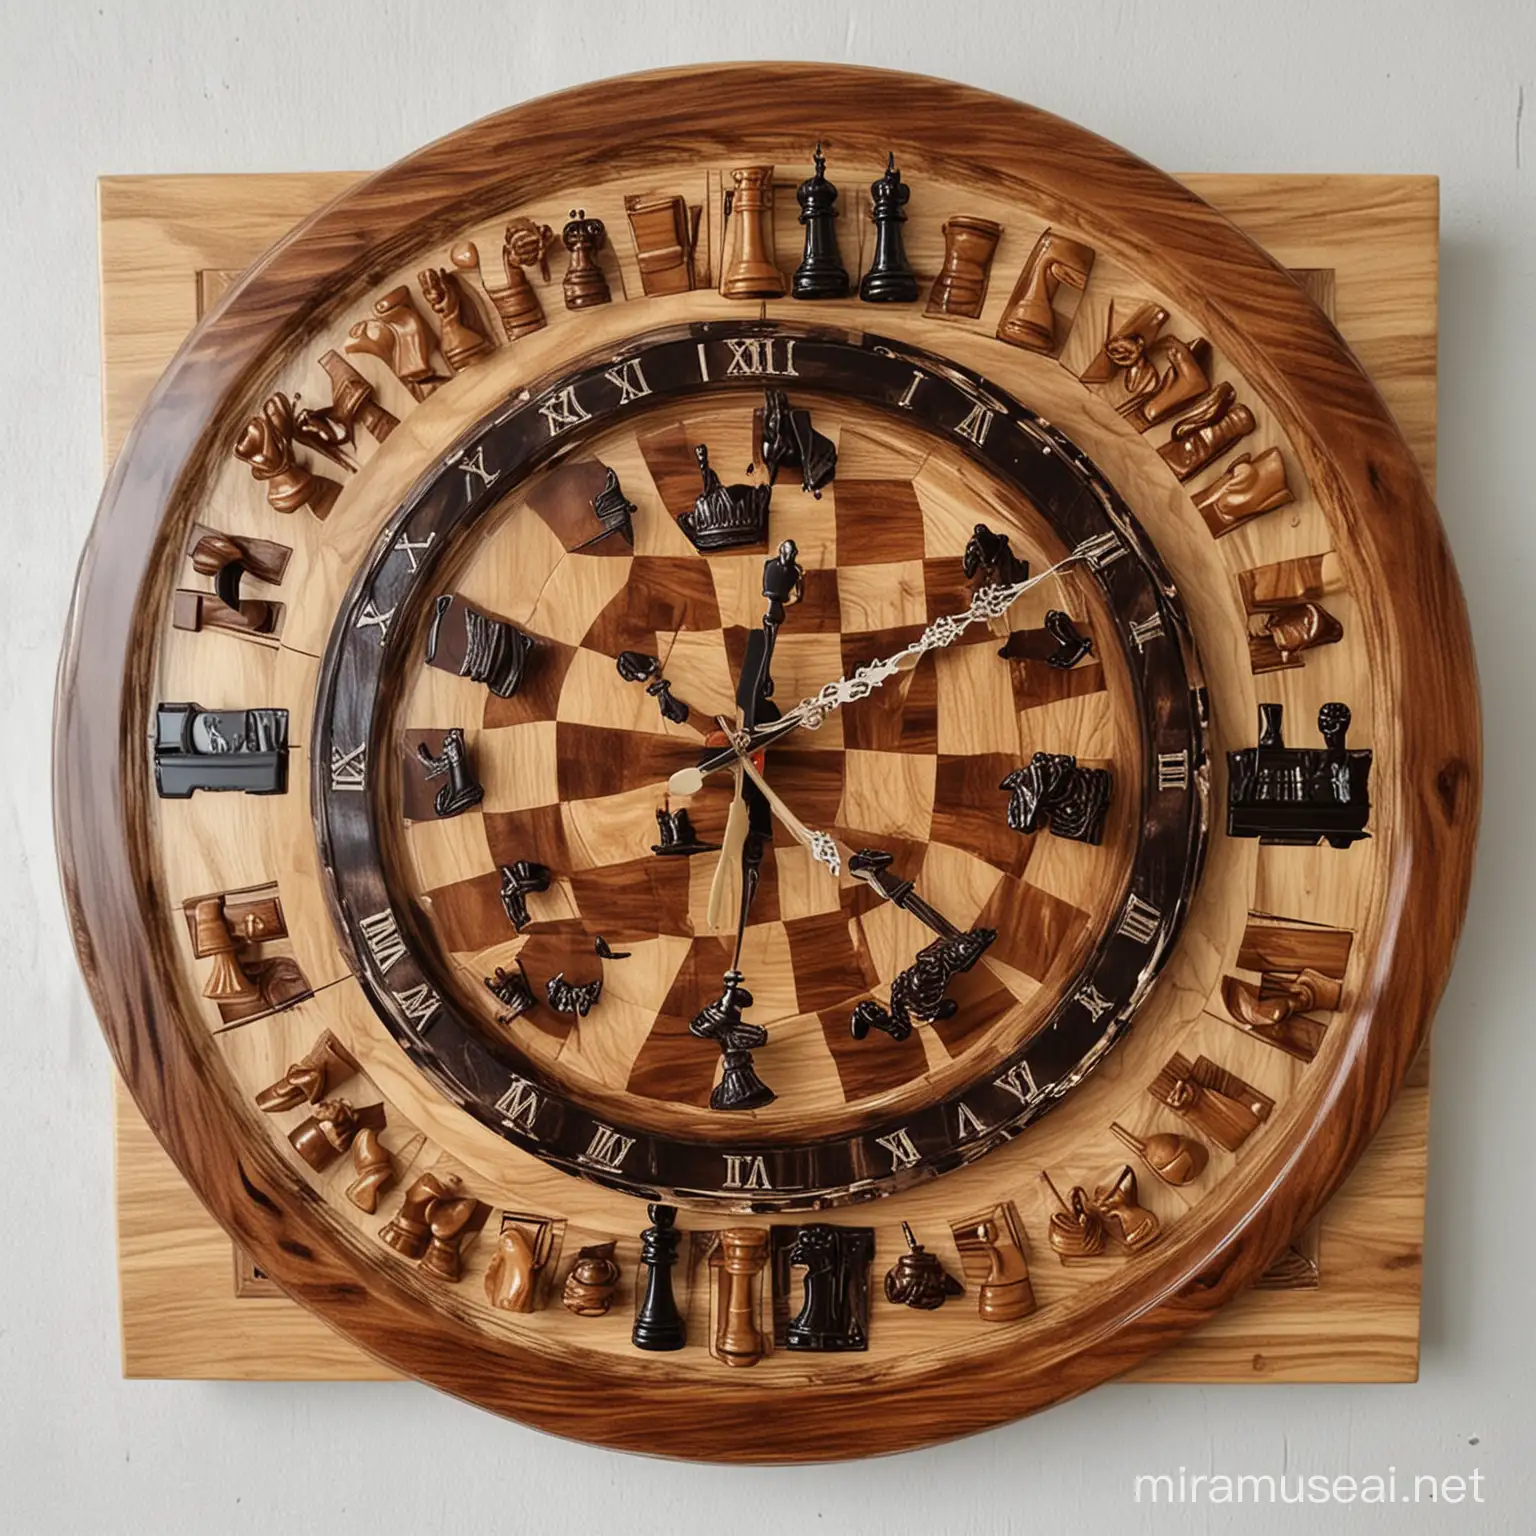 beutifulll wall clock and chess board  made of epoxy resin 